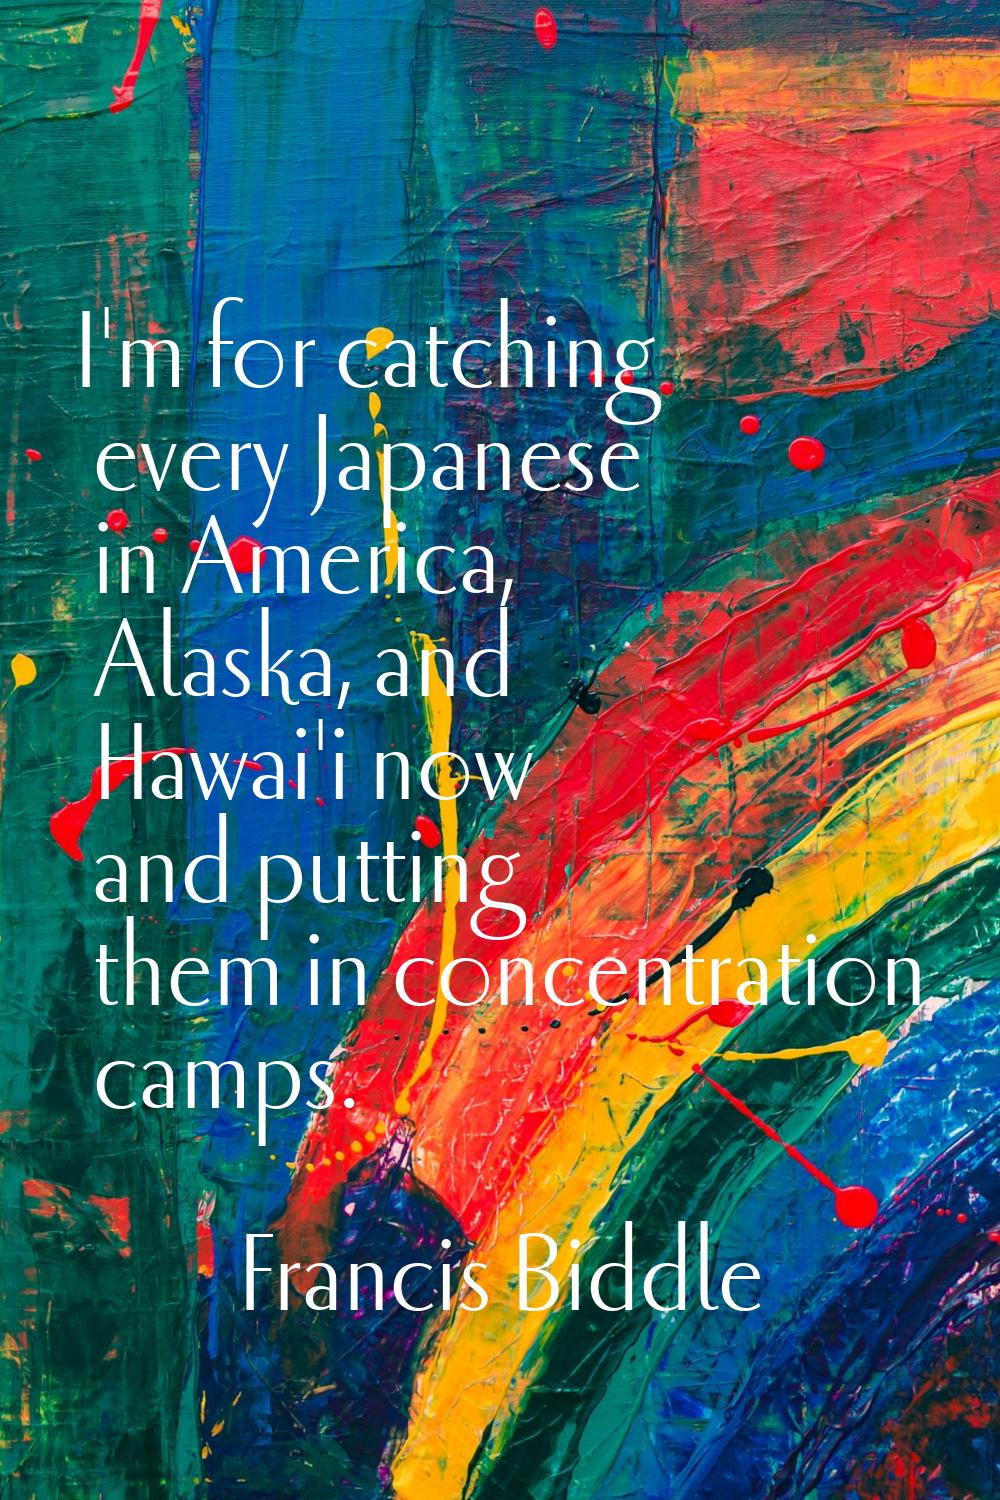 I'm for catching every Japanese in America, Alaska, and Hawai'i now and putting them in concentrati